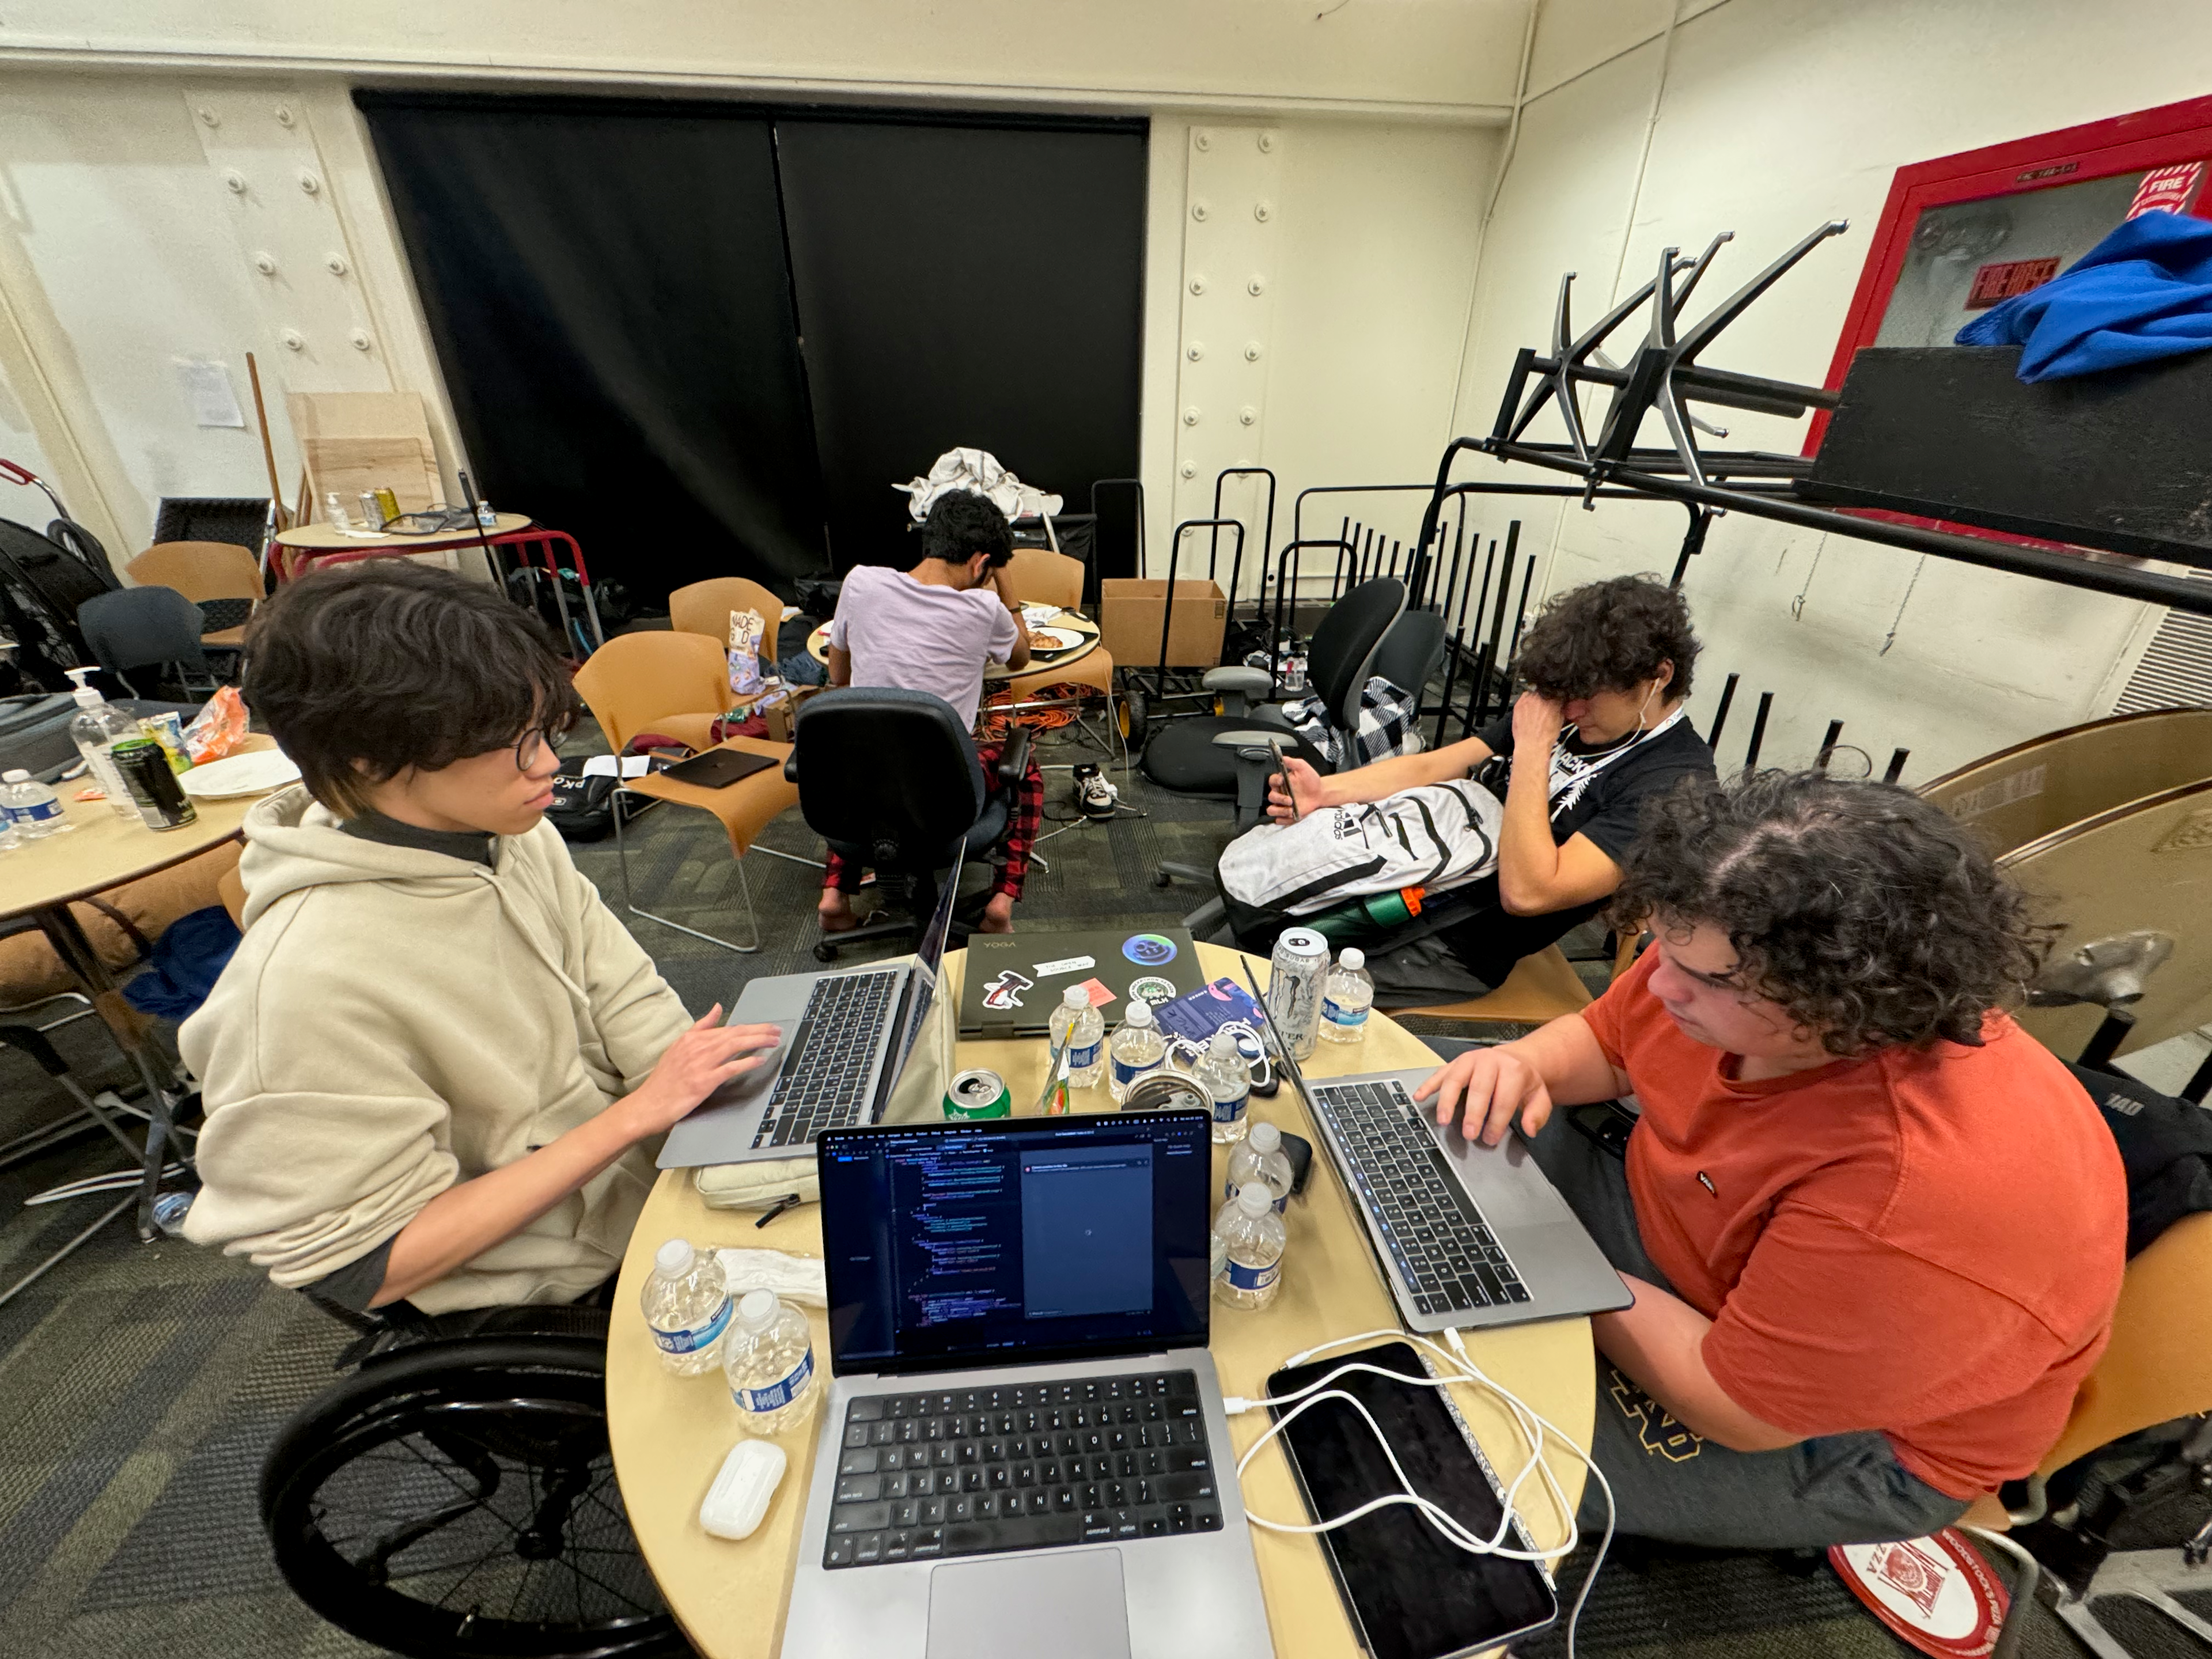 My team sitting around a table, working on the CruzHacks 2024 project. Several laptops are open, including one with Xcode running.